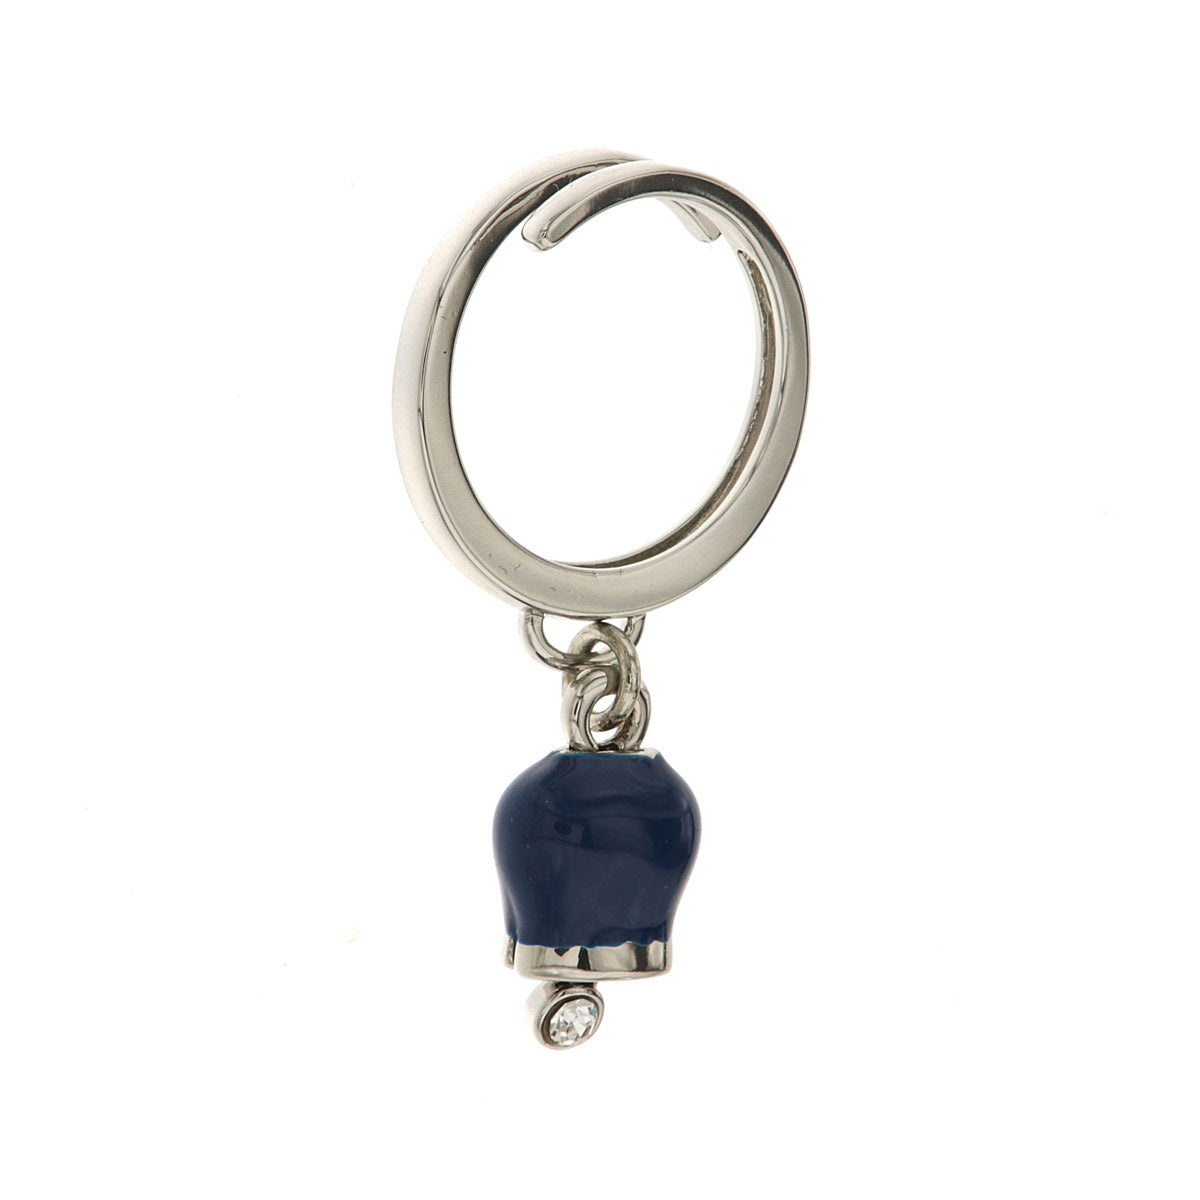 Metal ring with bell bille pendant blue, embellished with light point